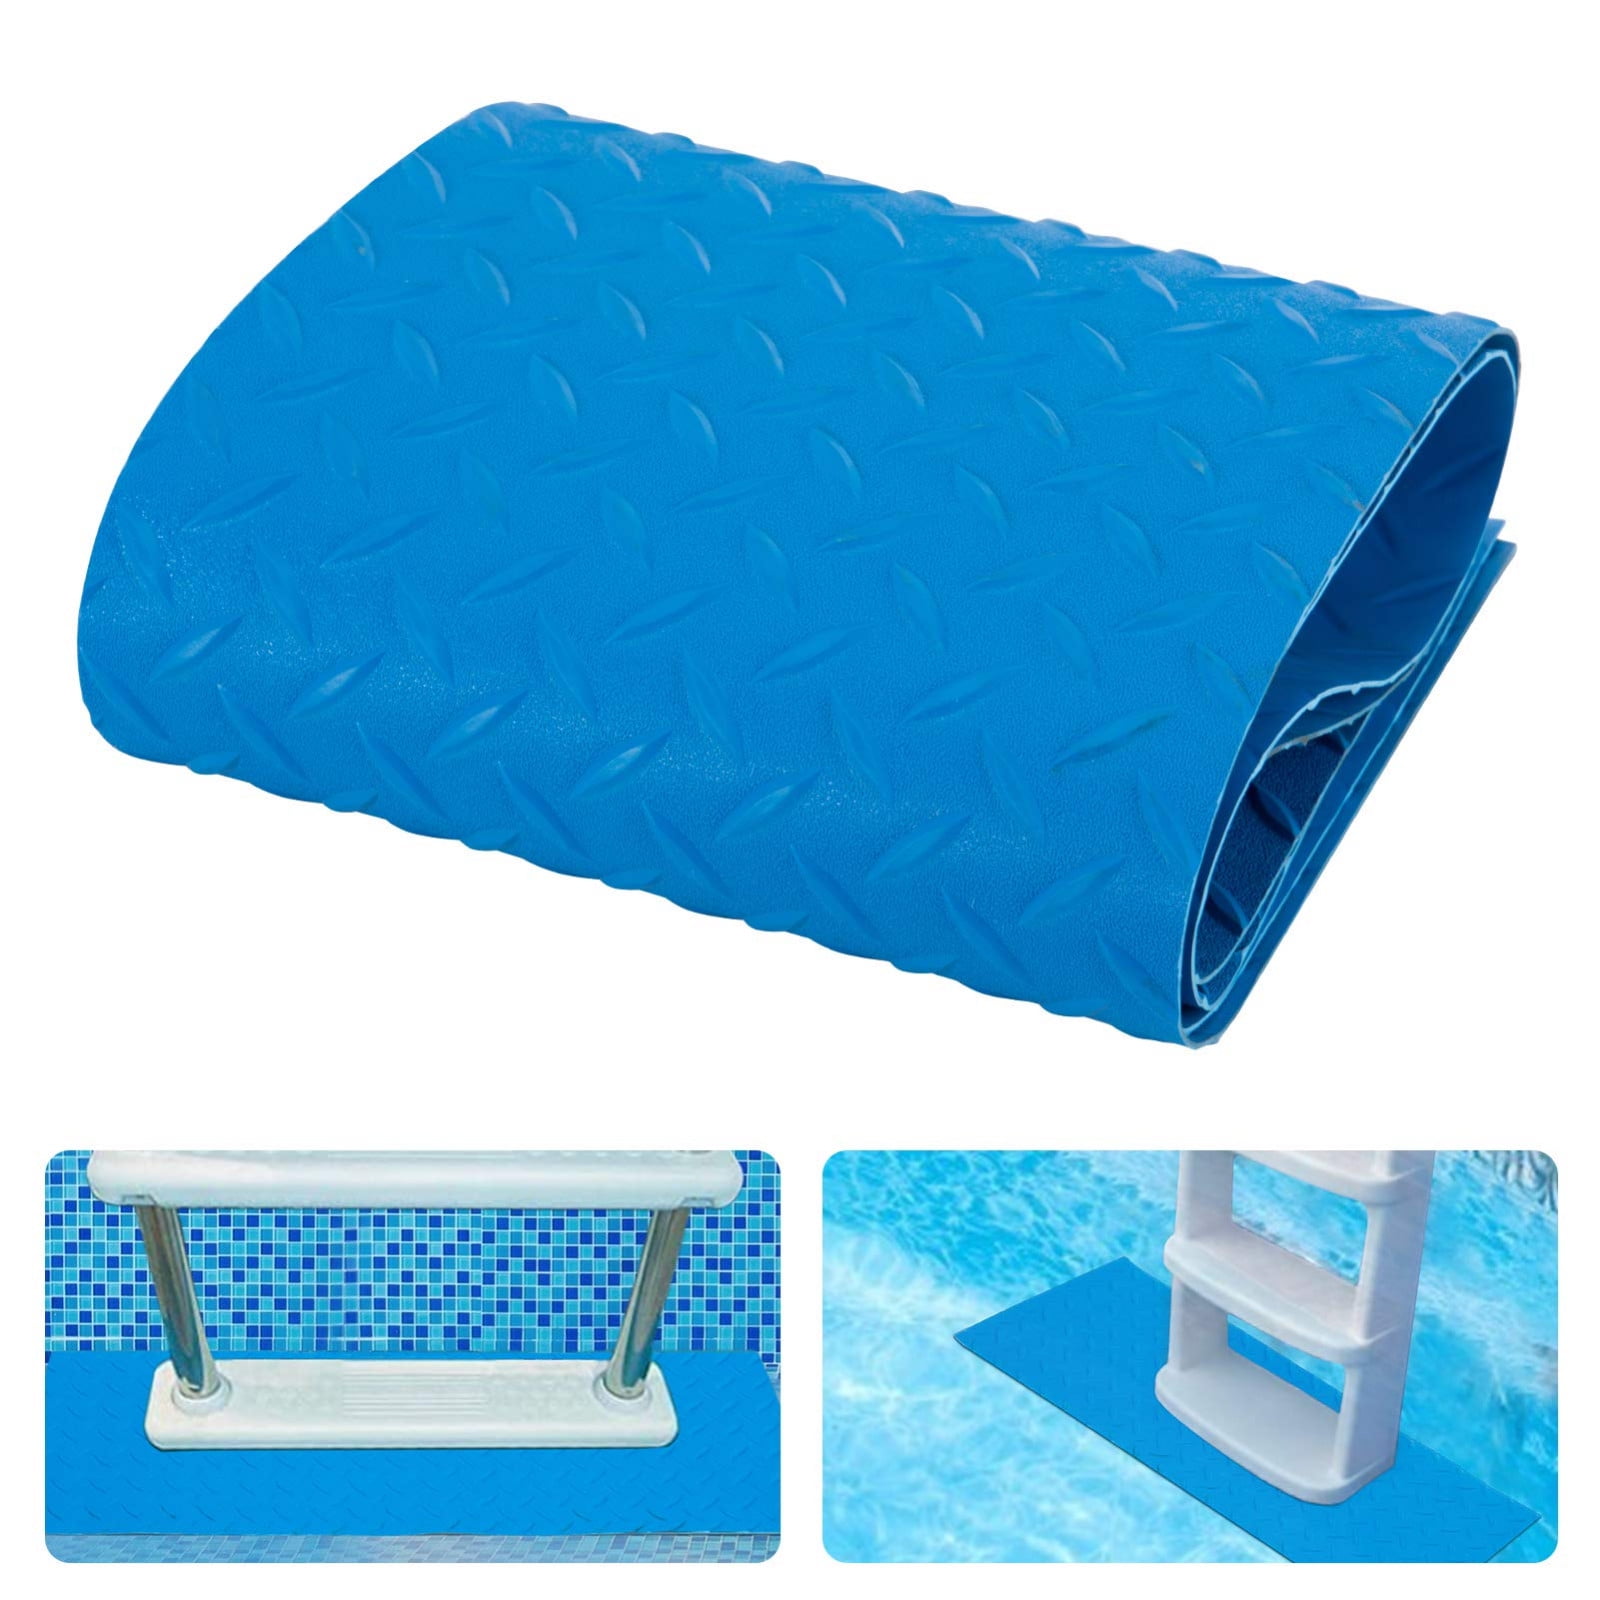 9 x 36 inch Pool Ladder Mat Thick Large Swimming Ladder Pad for Above Ground Pool Step Pad with Non-Slip Texture-Protective Ladder Mat-Pool Mat for Pool Liner & Stairs Protective Safety Pad 